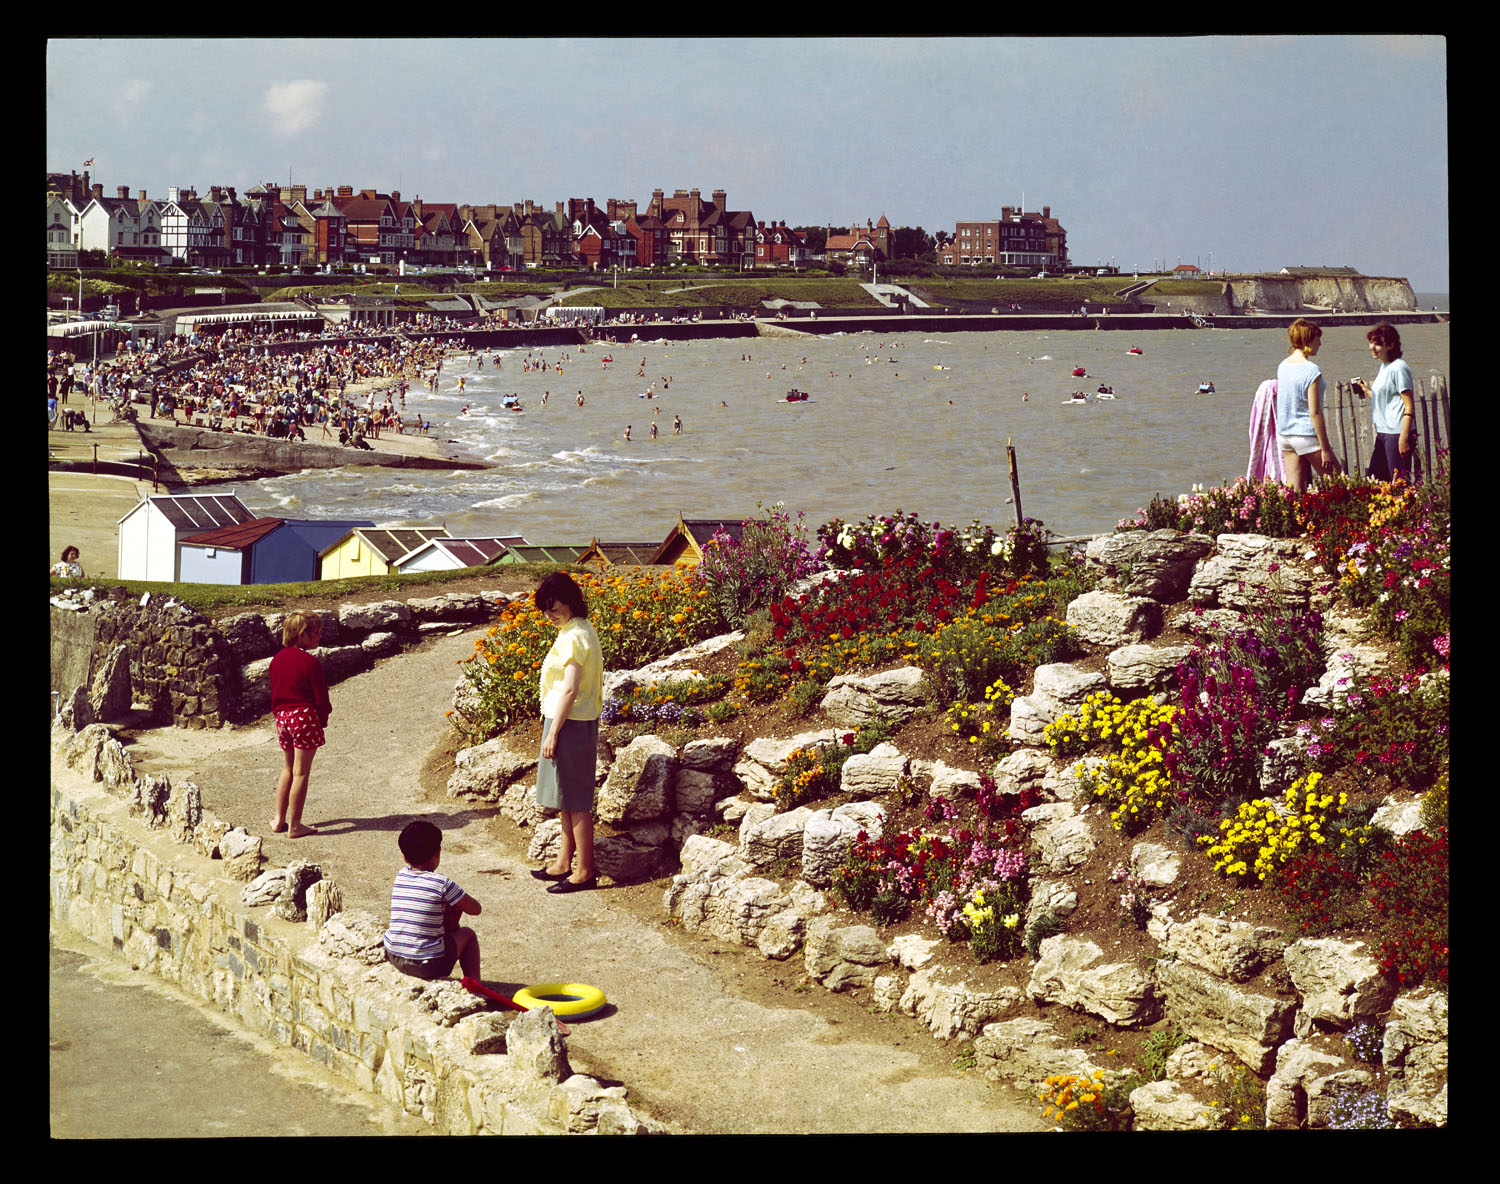 St. Mildred's Bay, Westgate-on-Sea by Joan Willis